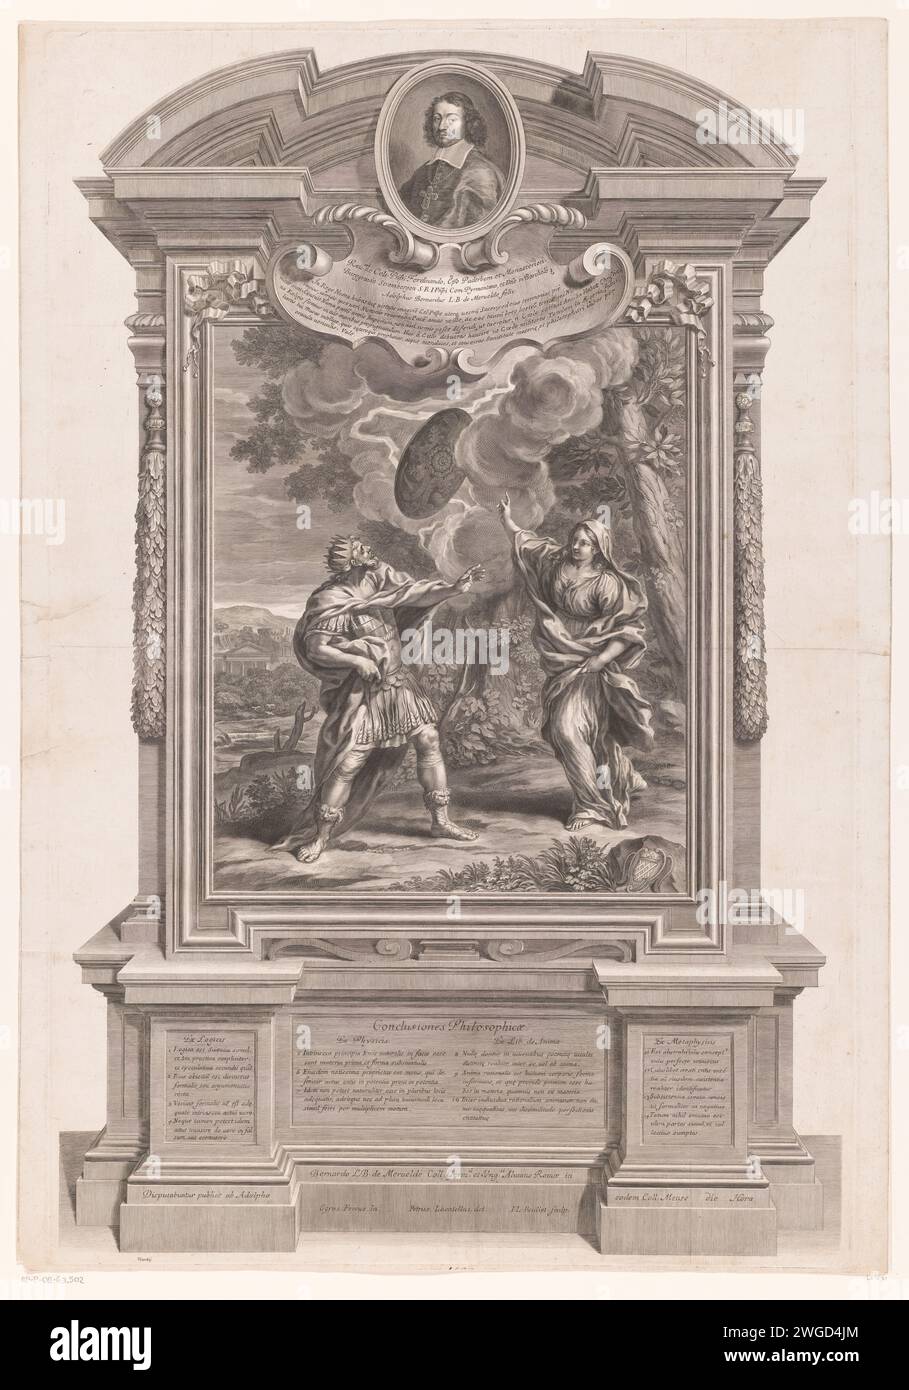 King Numa receives the Holy Shield, Jean Louis Roullet, After Pietro Locatelli, After Ciro Ferri, 1655 - 1699 print   paper engraving / etching (Story of) Numa Pompilius. Philosophy Stock Photo